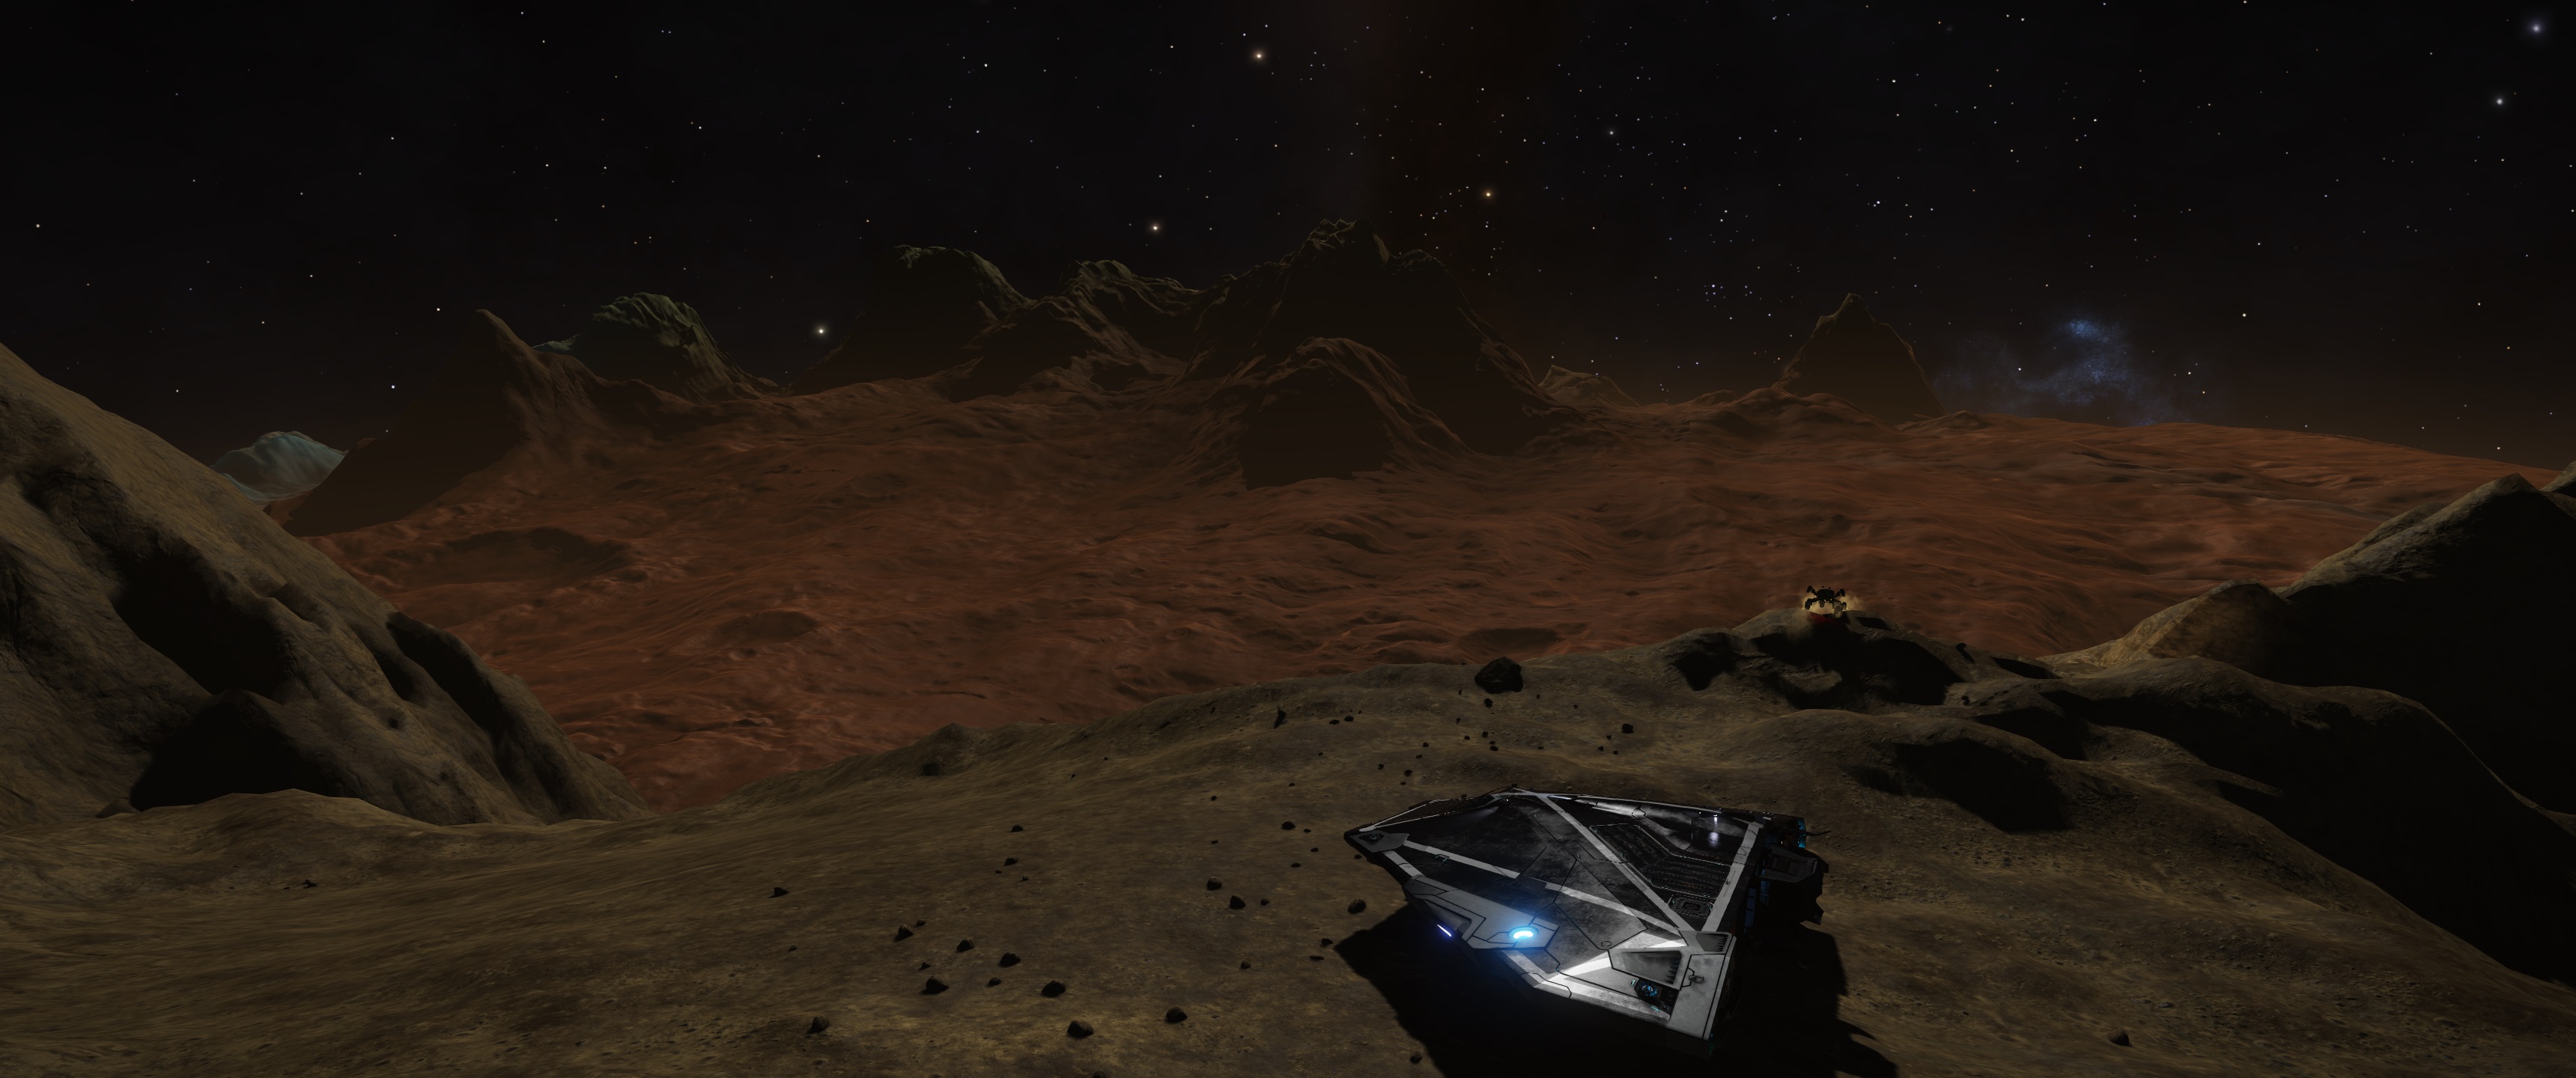 Day 22 - cobra and srv with view.jpg